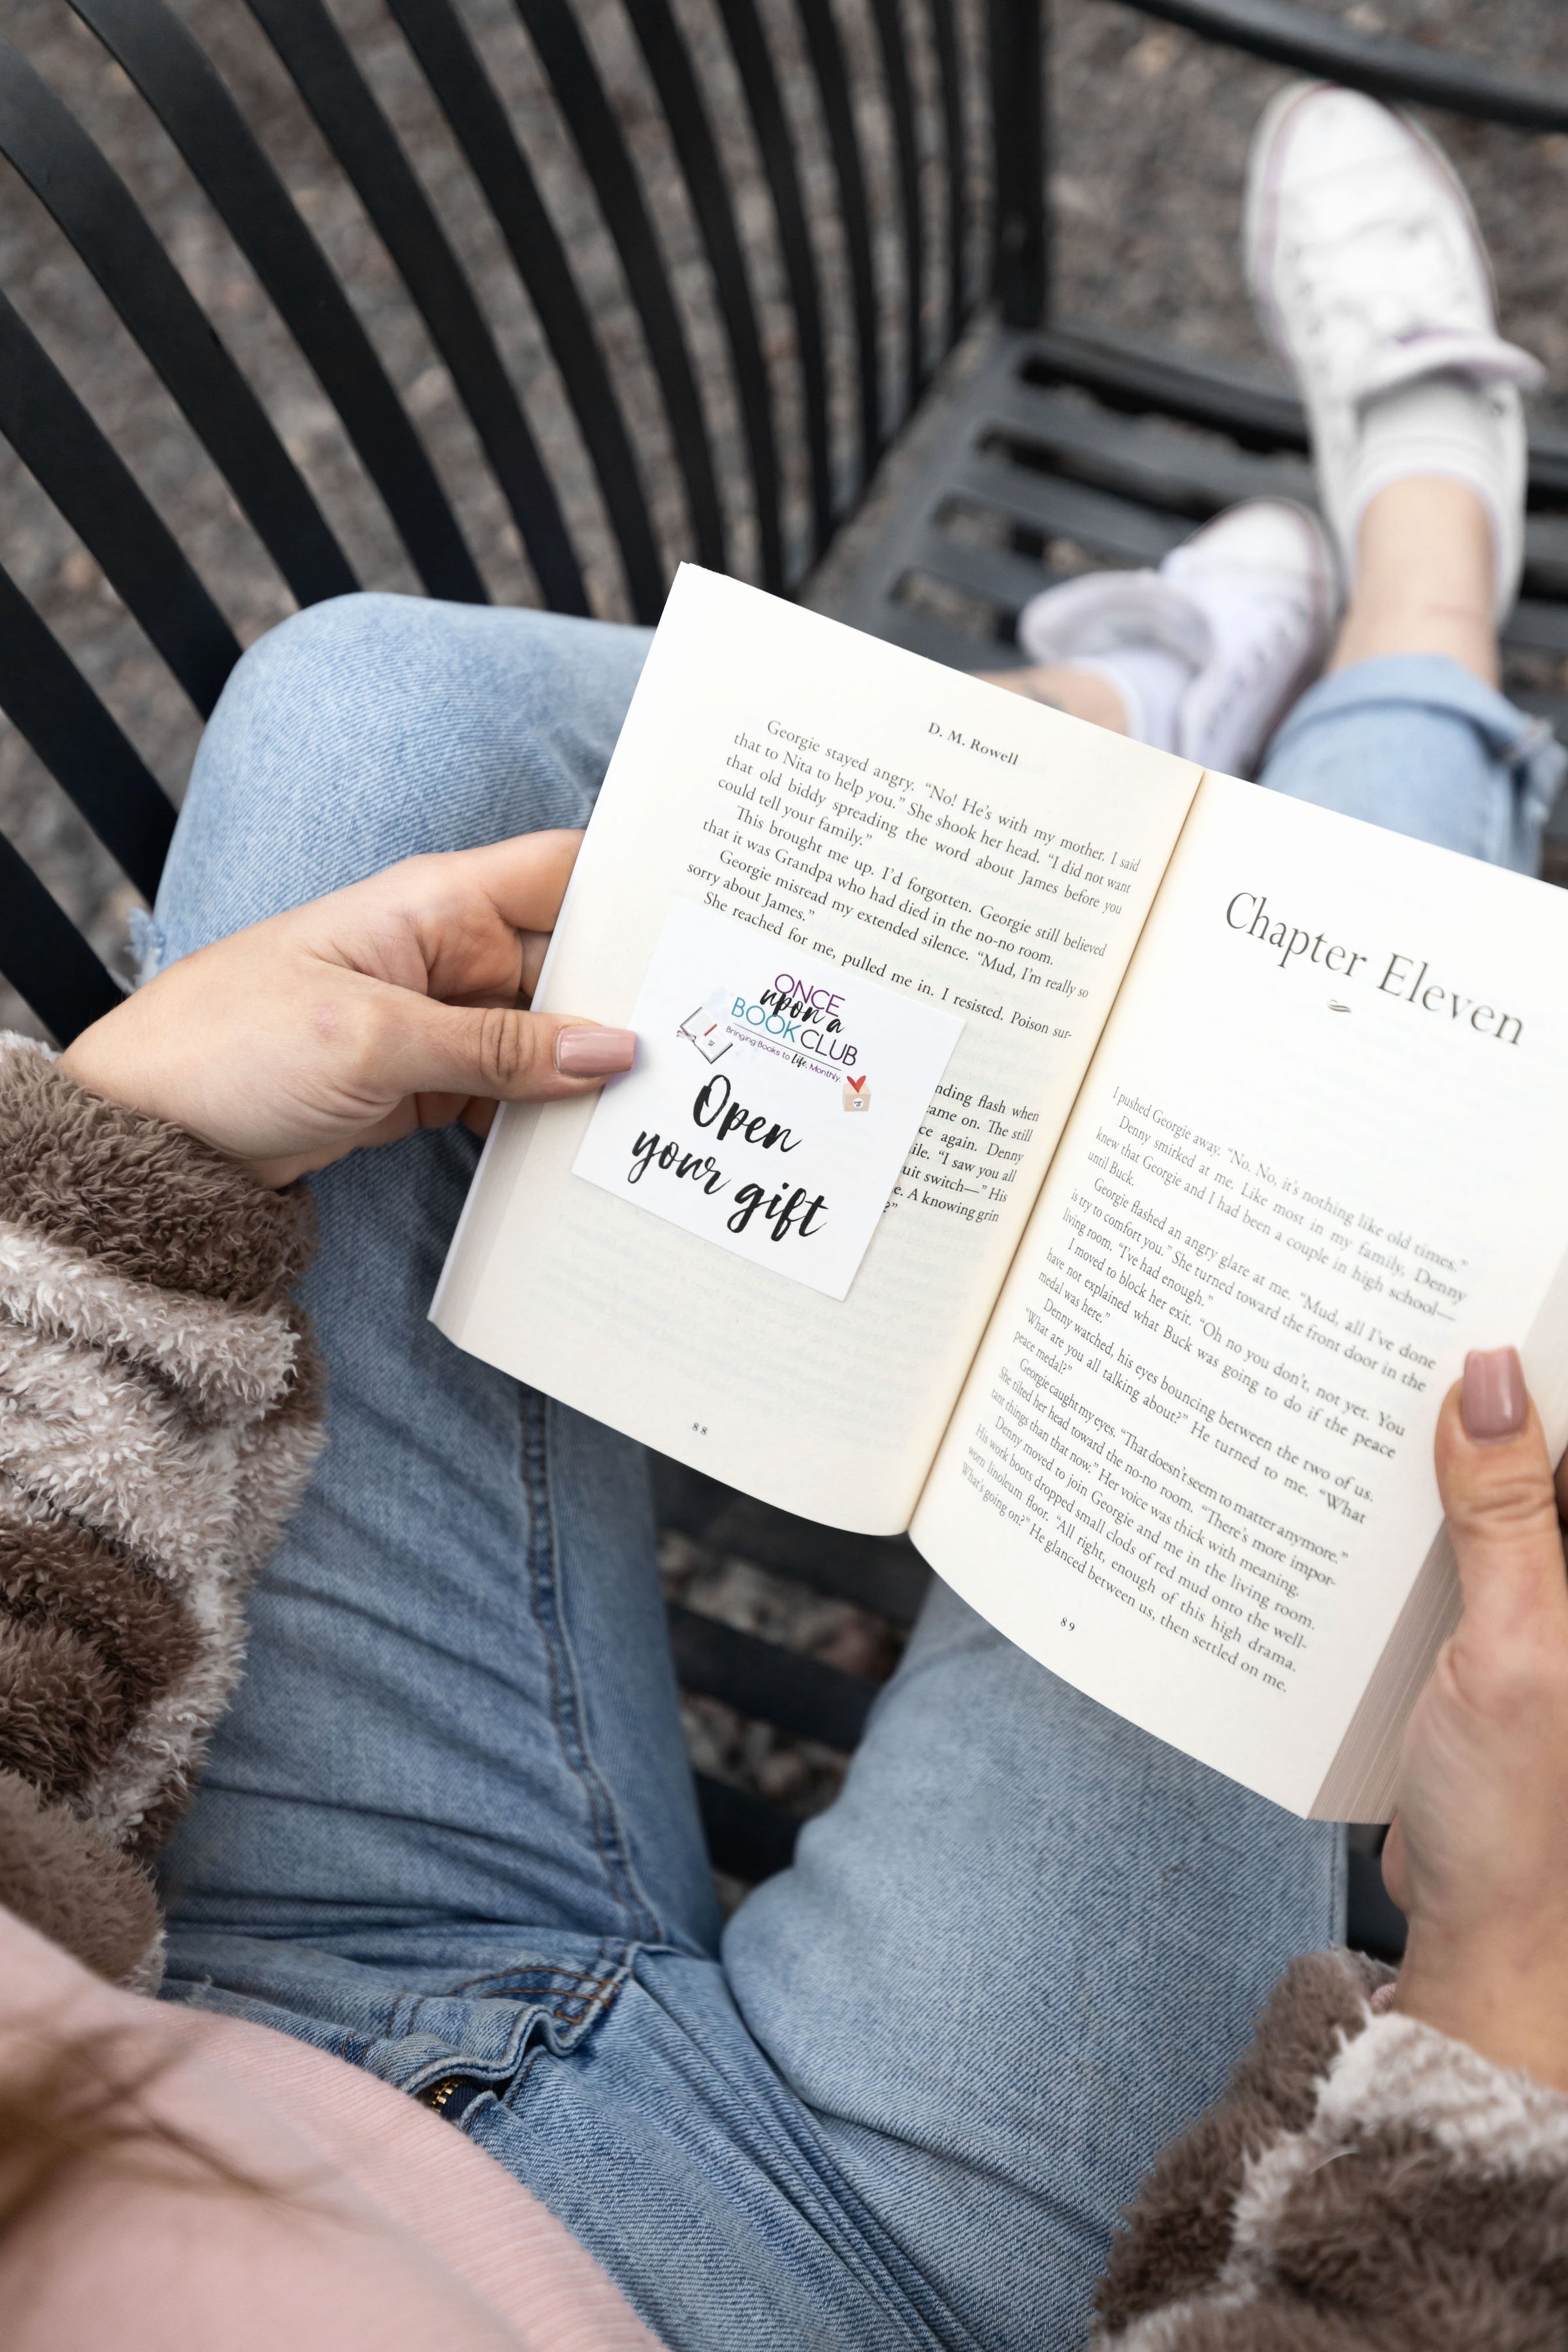 A pair of white hands holds open a book on a bench. Inside the book is a sticky note showing Open Your Gift to signify the reader should open the corresponding gift that is mentioned at that moment in the story.